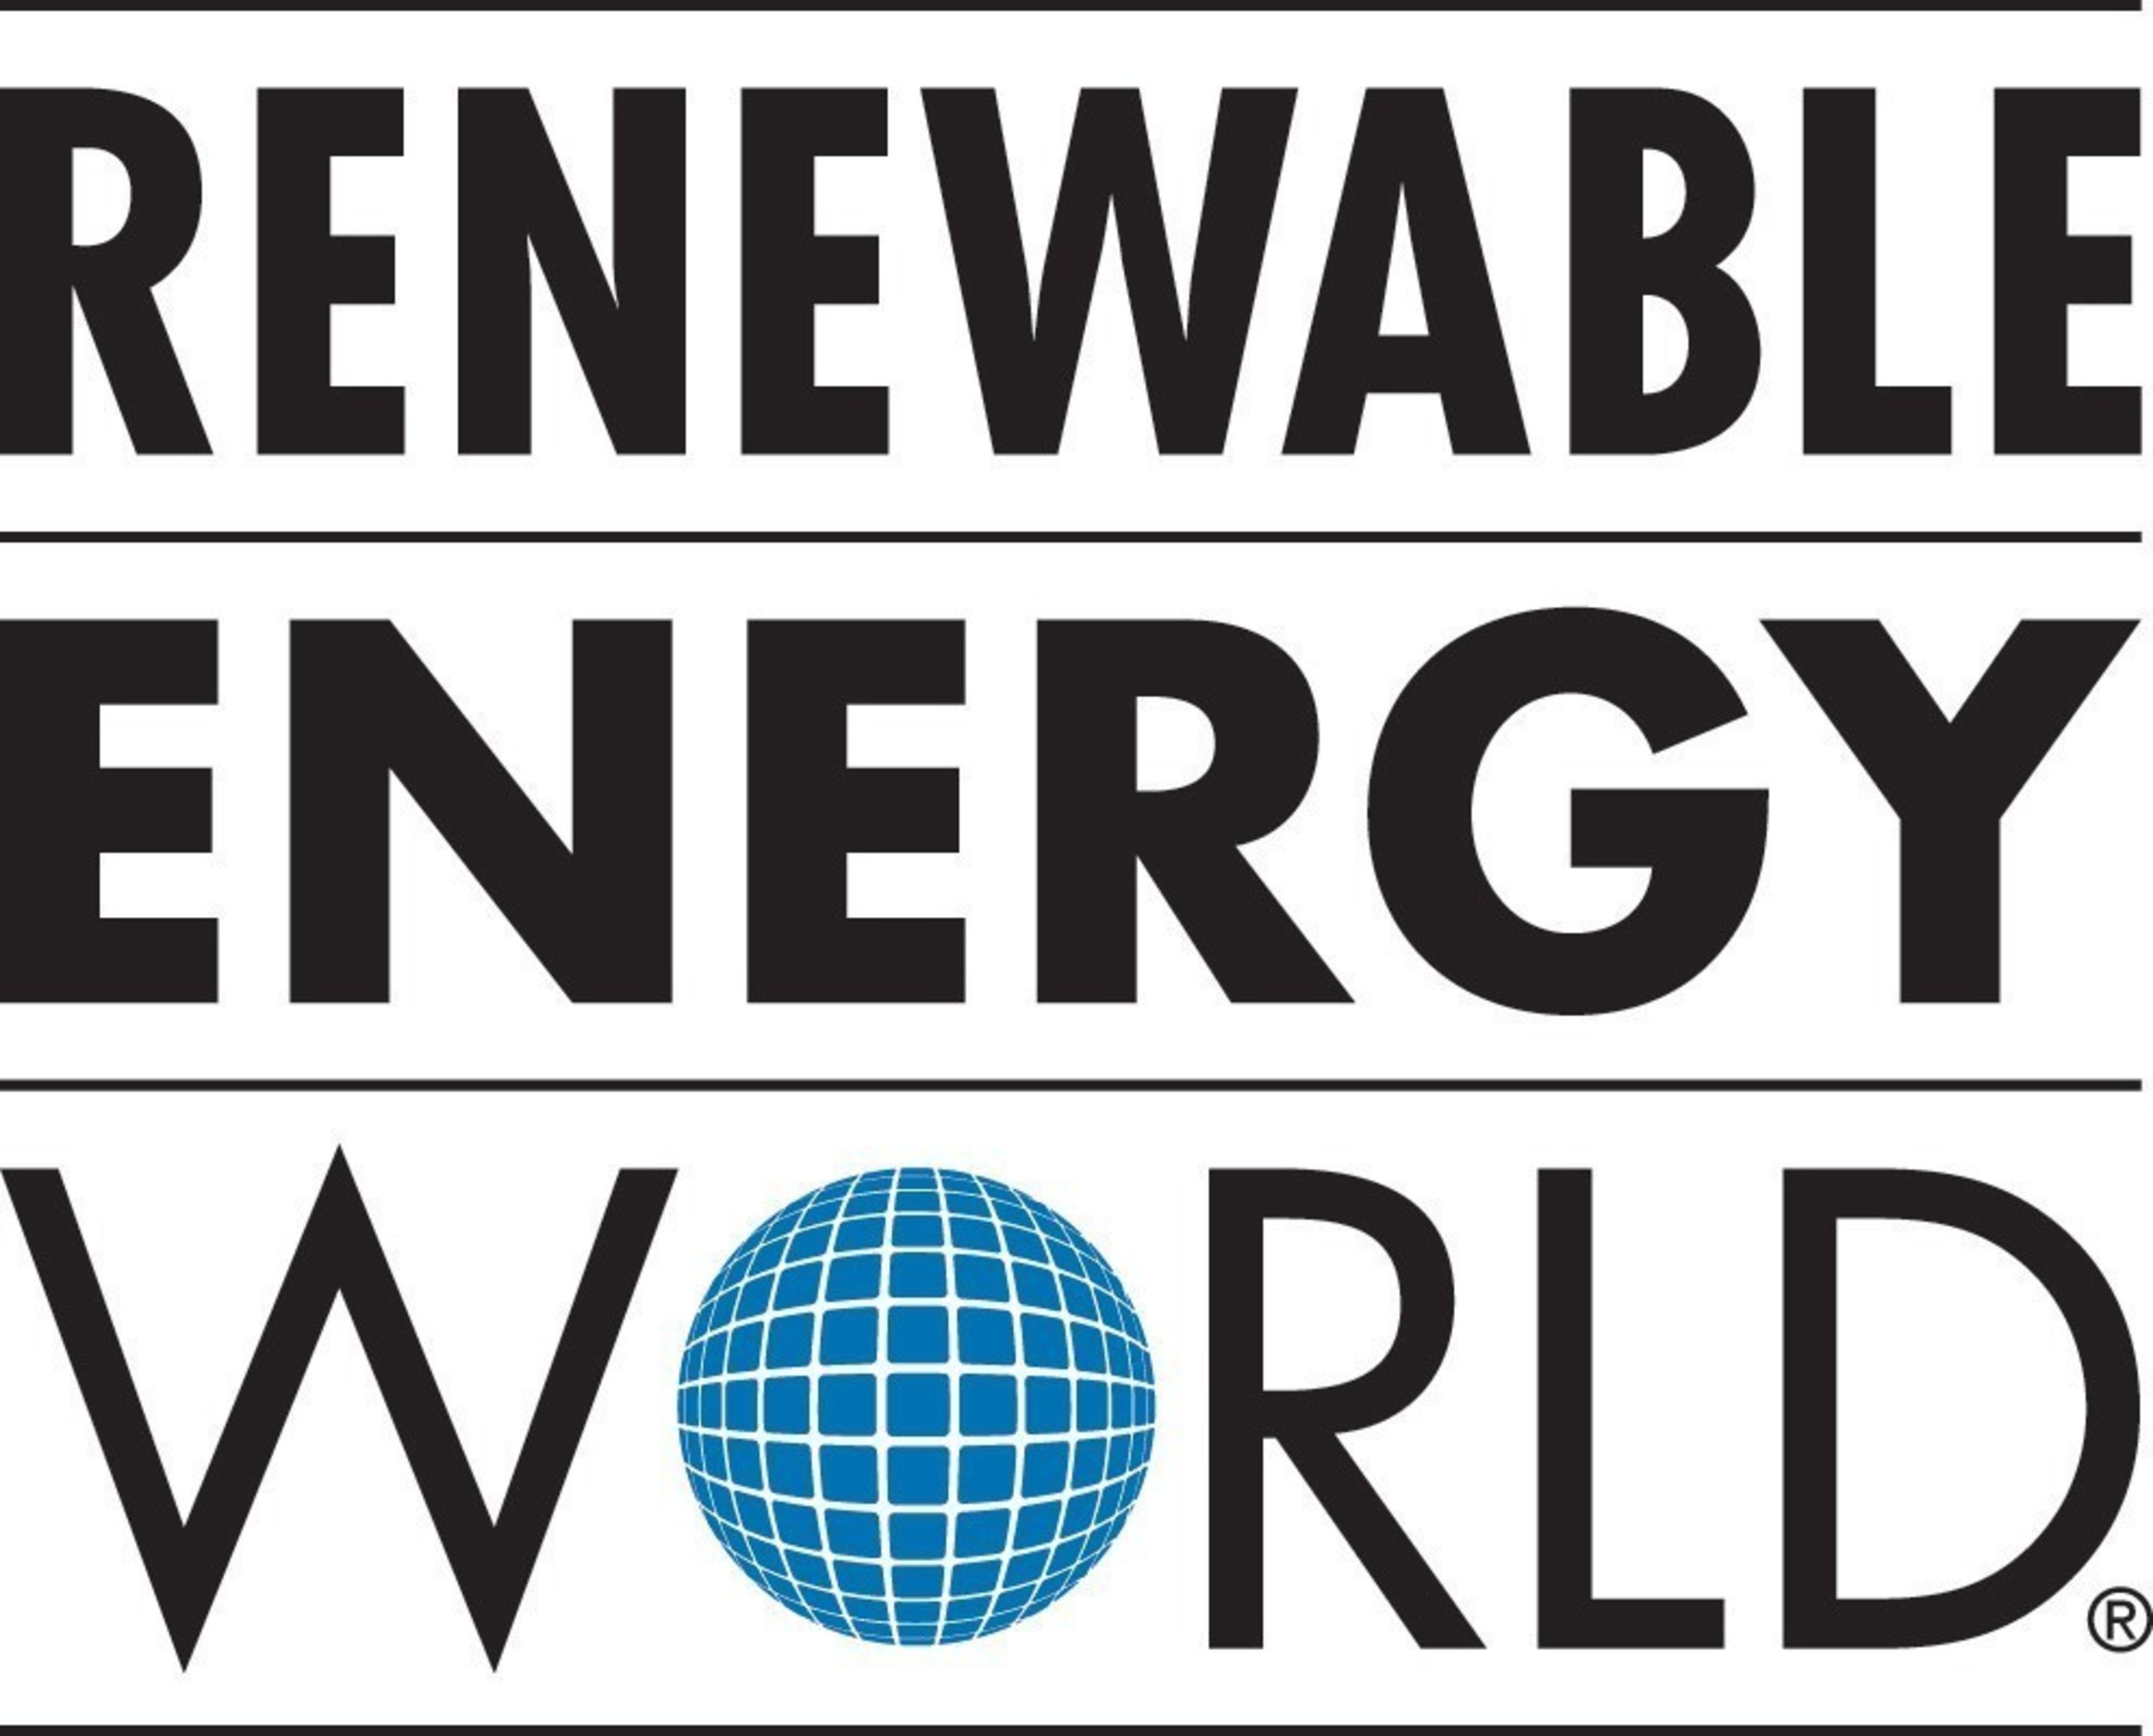 Renewable Energy World, representing www.renewableenergyworld.com and Renewable Energy World International event (a part of Power Generation Week).